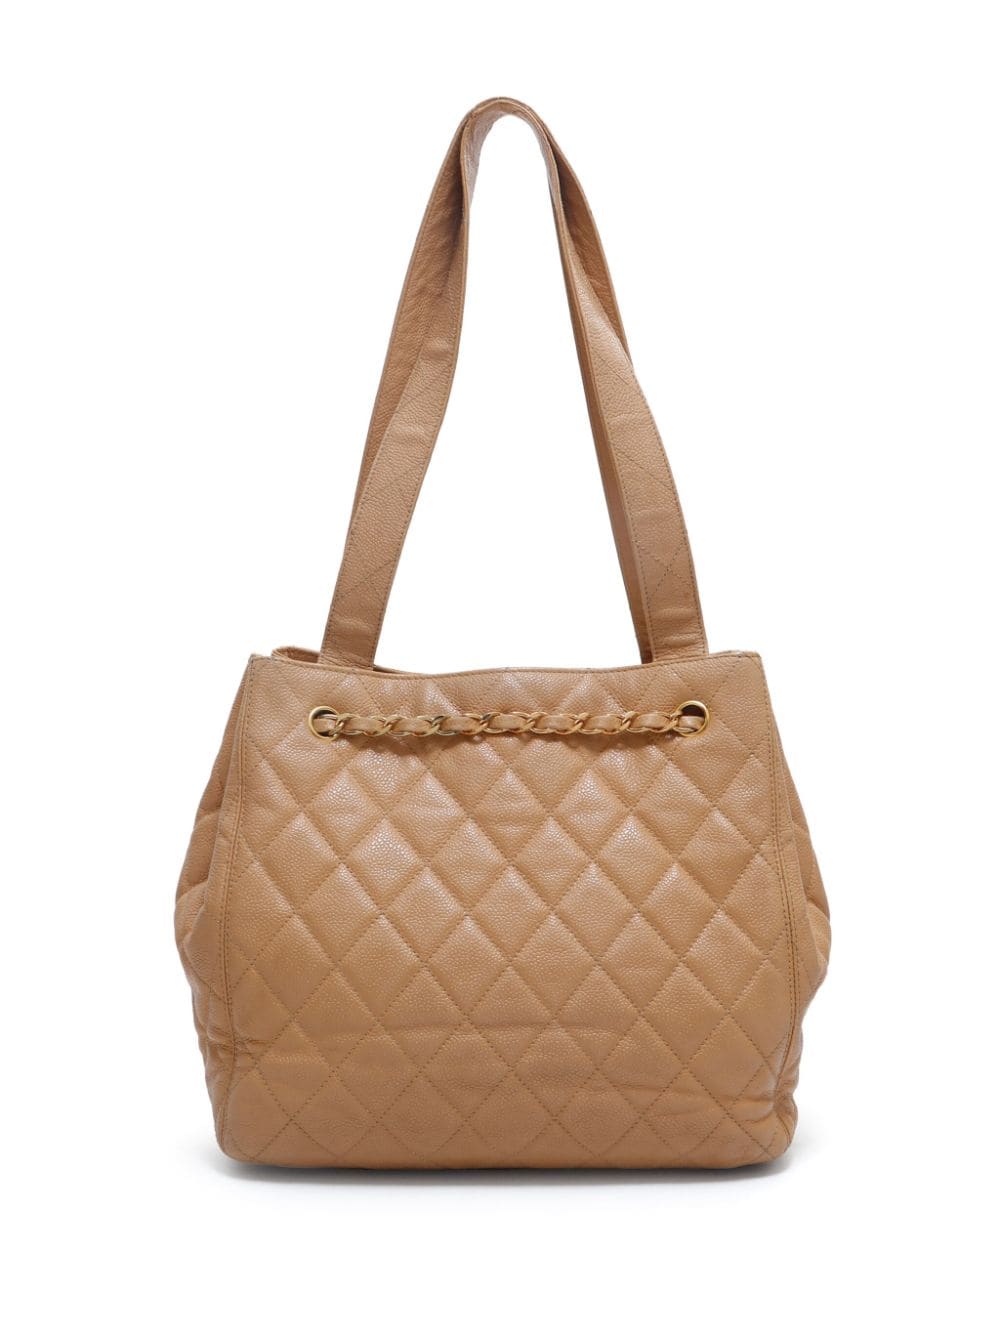 CHANEL Pre-Owned 1997 Coco shopper - Beige